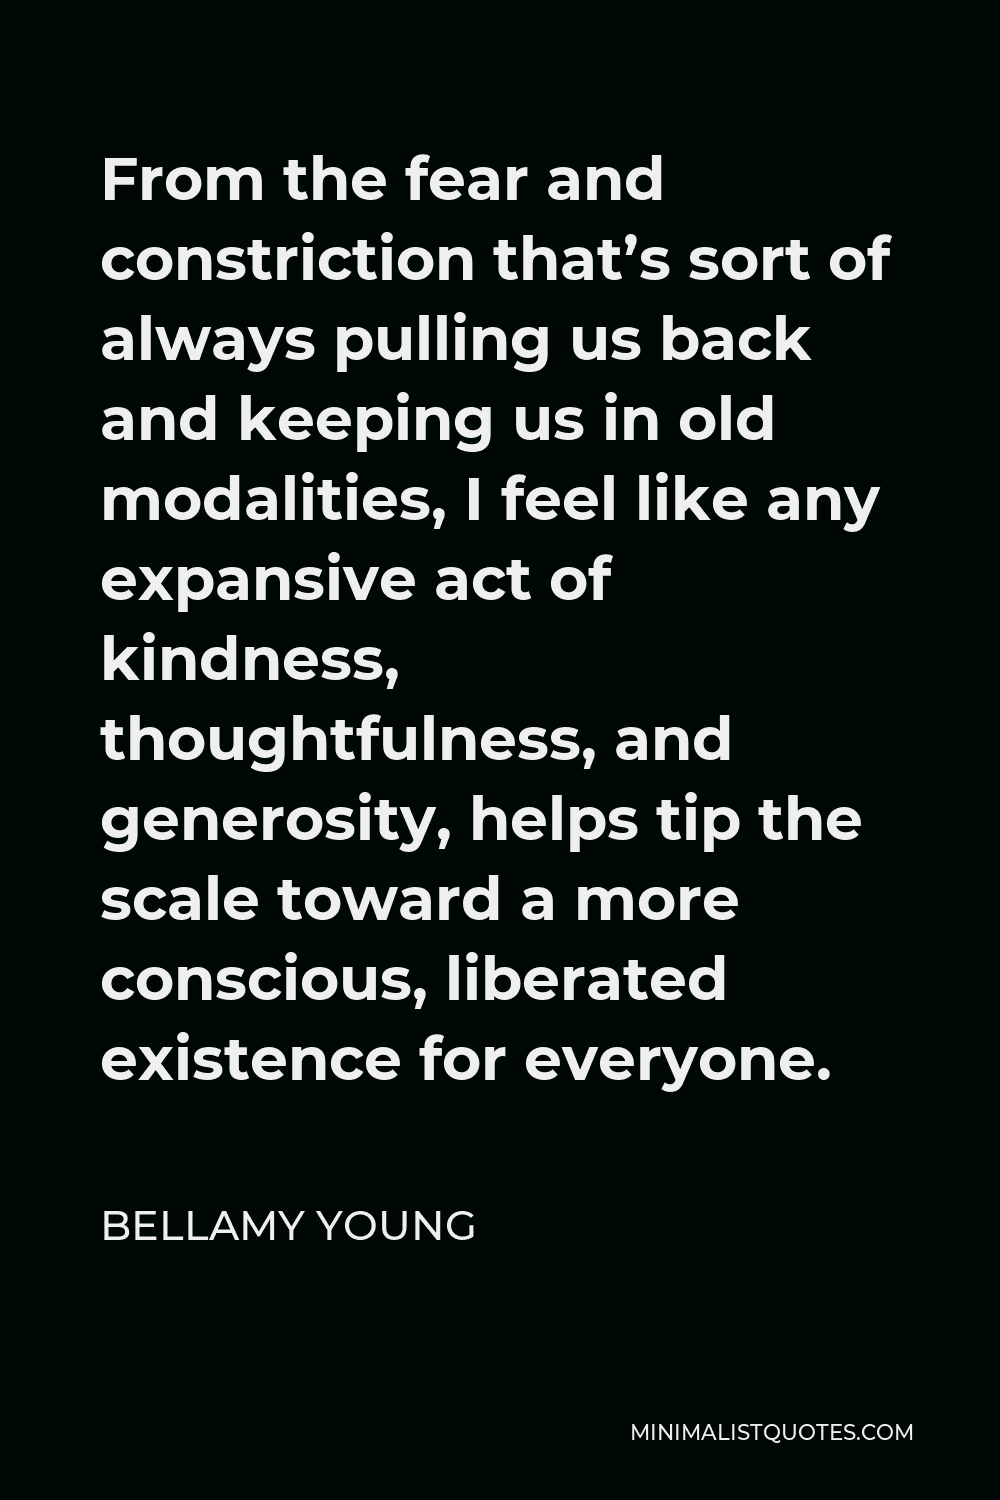 Bellamy Young Quote - From the fear and constriction that’s sort of always pulling us back and keeping us in old modalities, I feel like any expansive act of kindness, thoughtfulness, and generosity, helps tip the scale toward a more conscious, liberated existence for everyone.